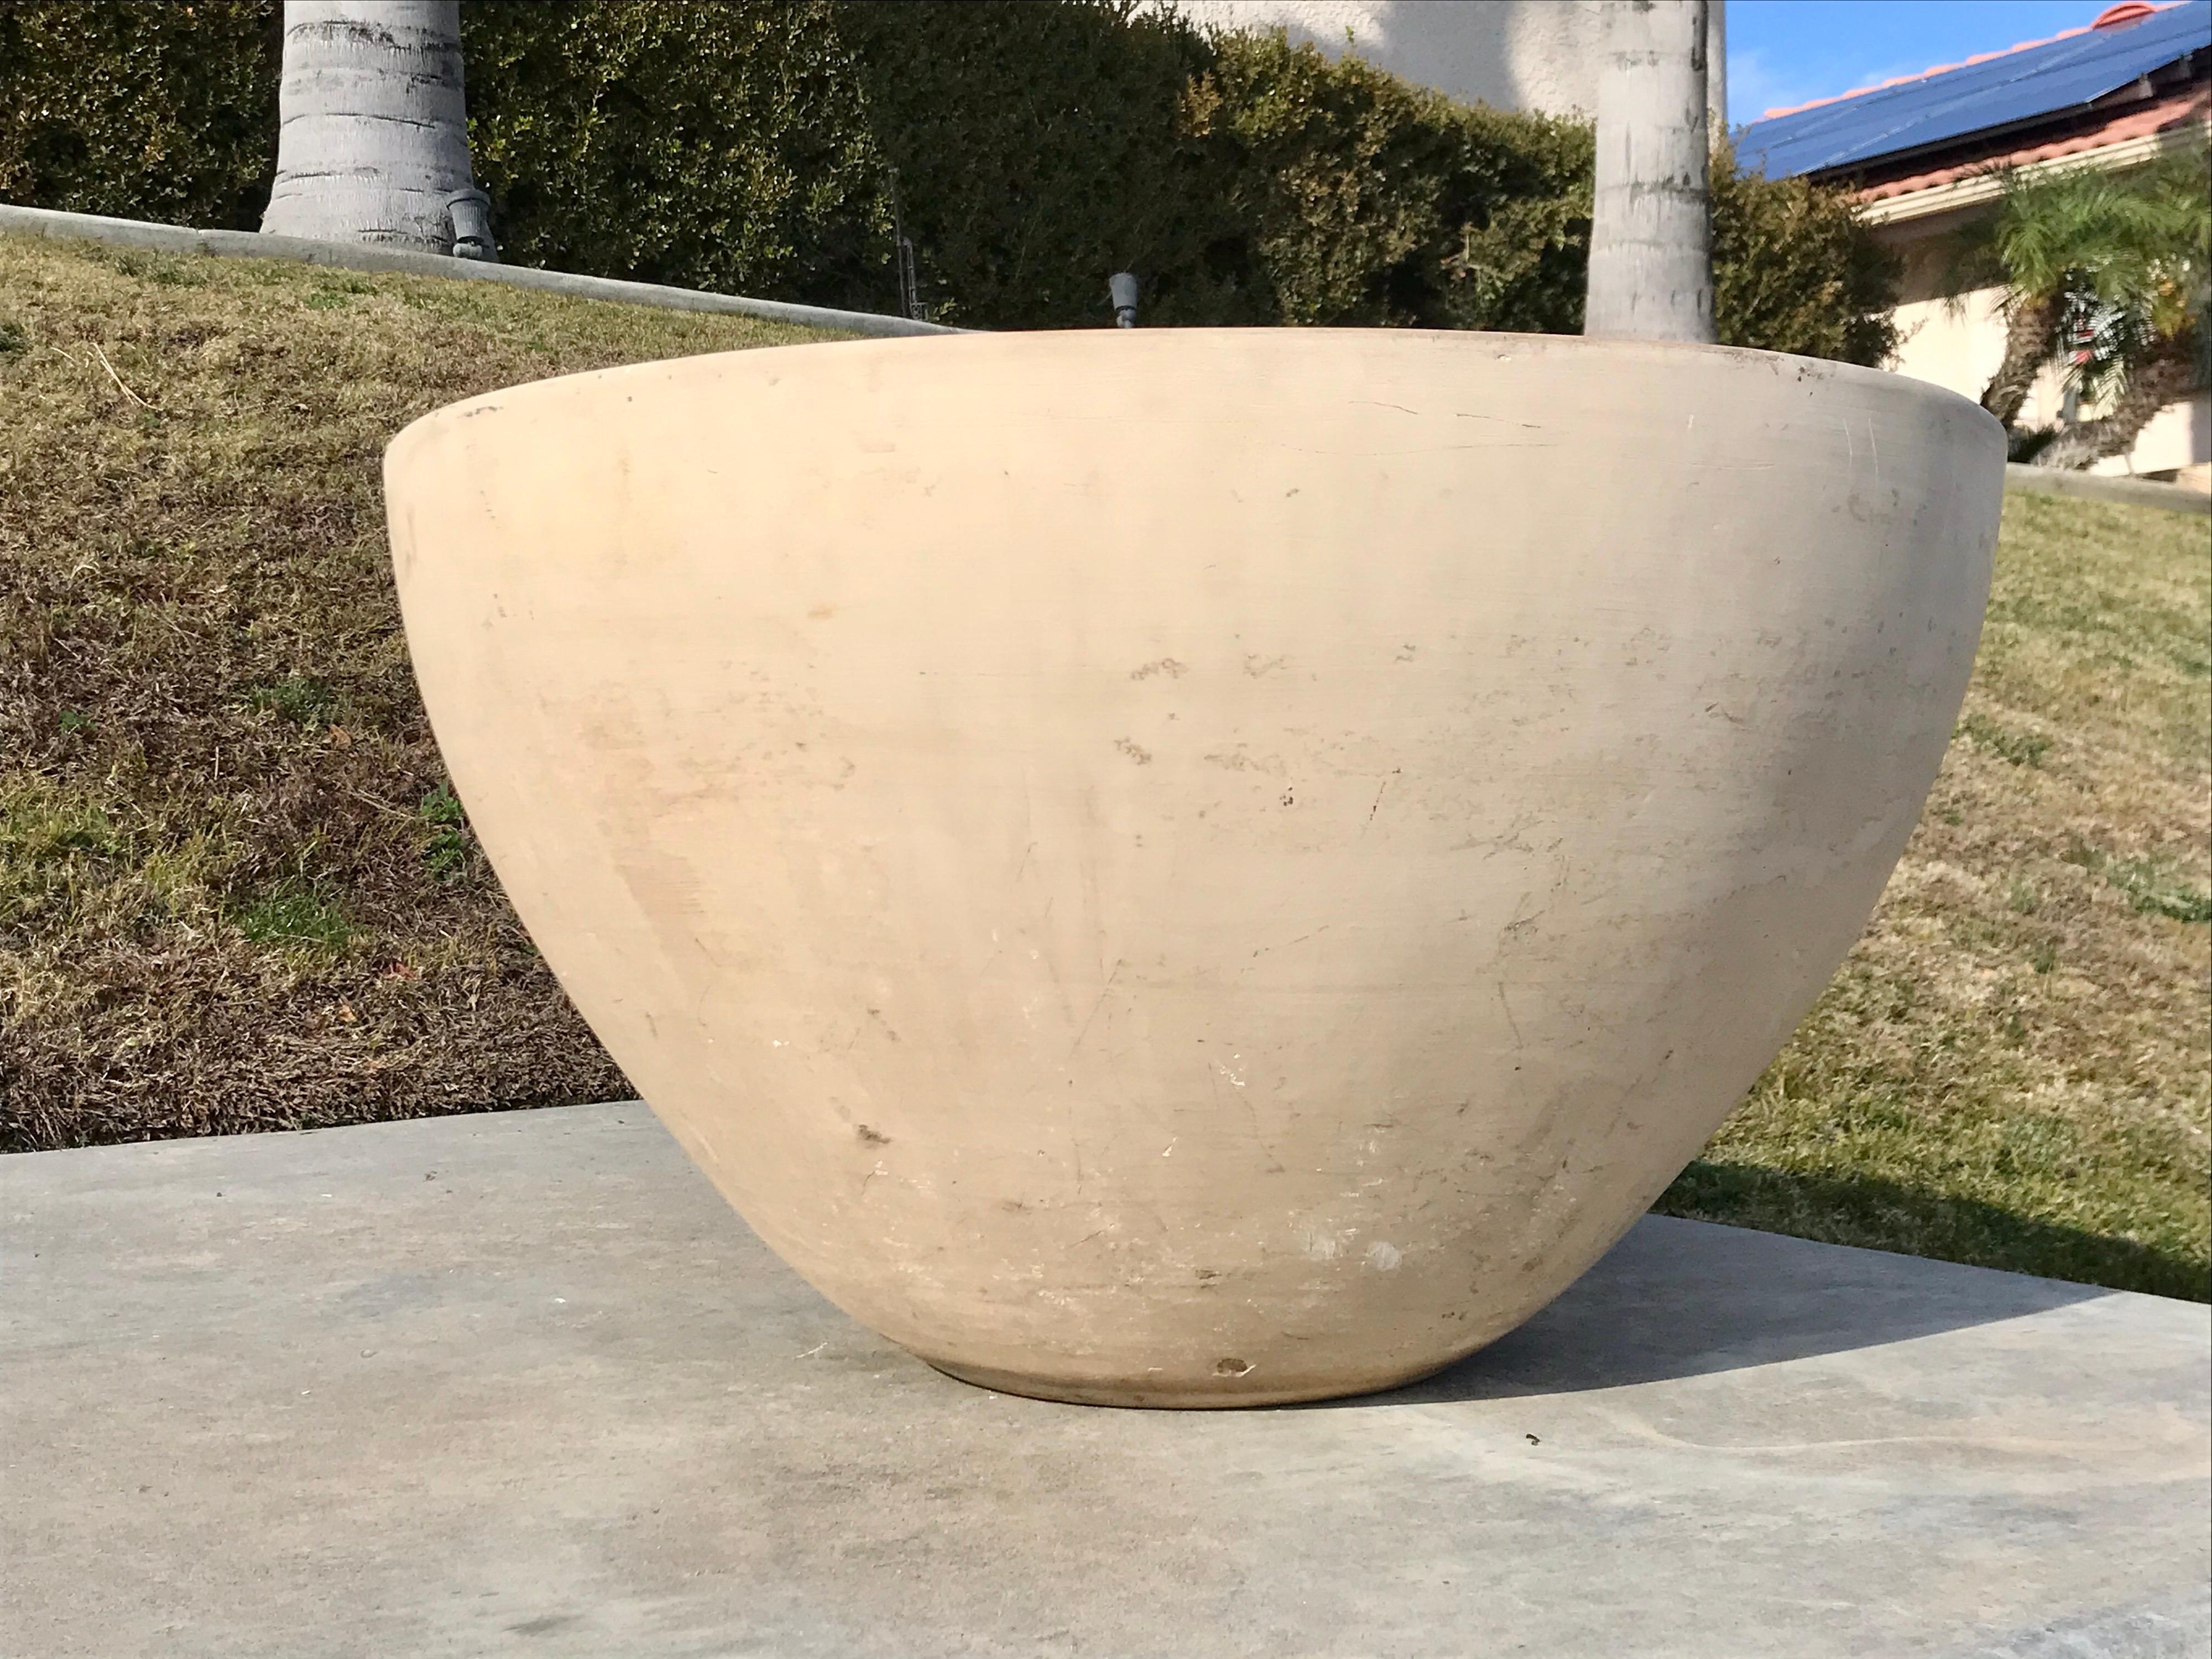 California design
Manufactured by Architectural Pottery USA
Natural bisque clay with a nice scale for a big cactus or succulent or use as a catch-all for blankets and firewood 
Like an old Etruscan vase it shows wear with a nice patina, minor